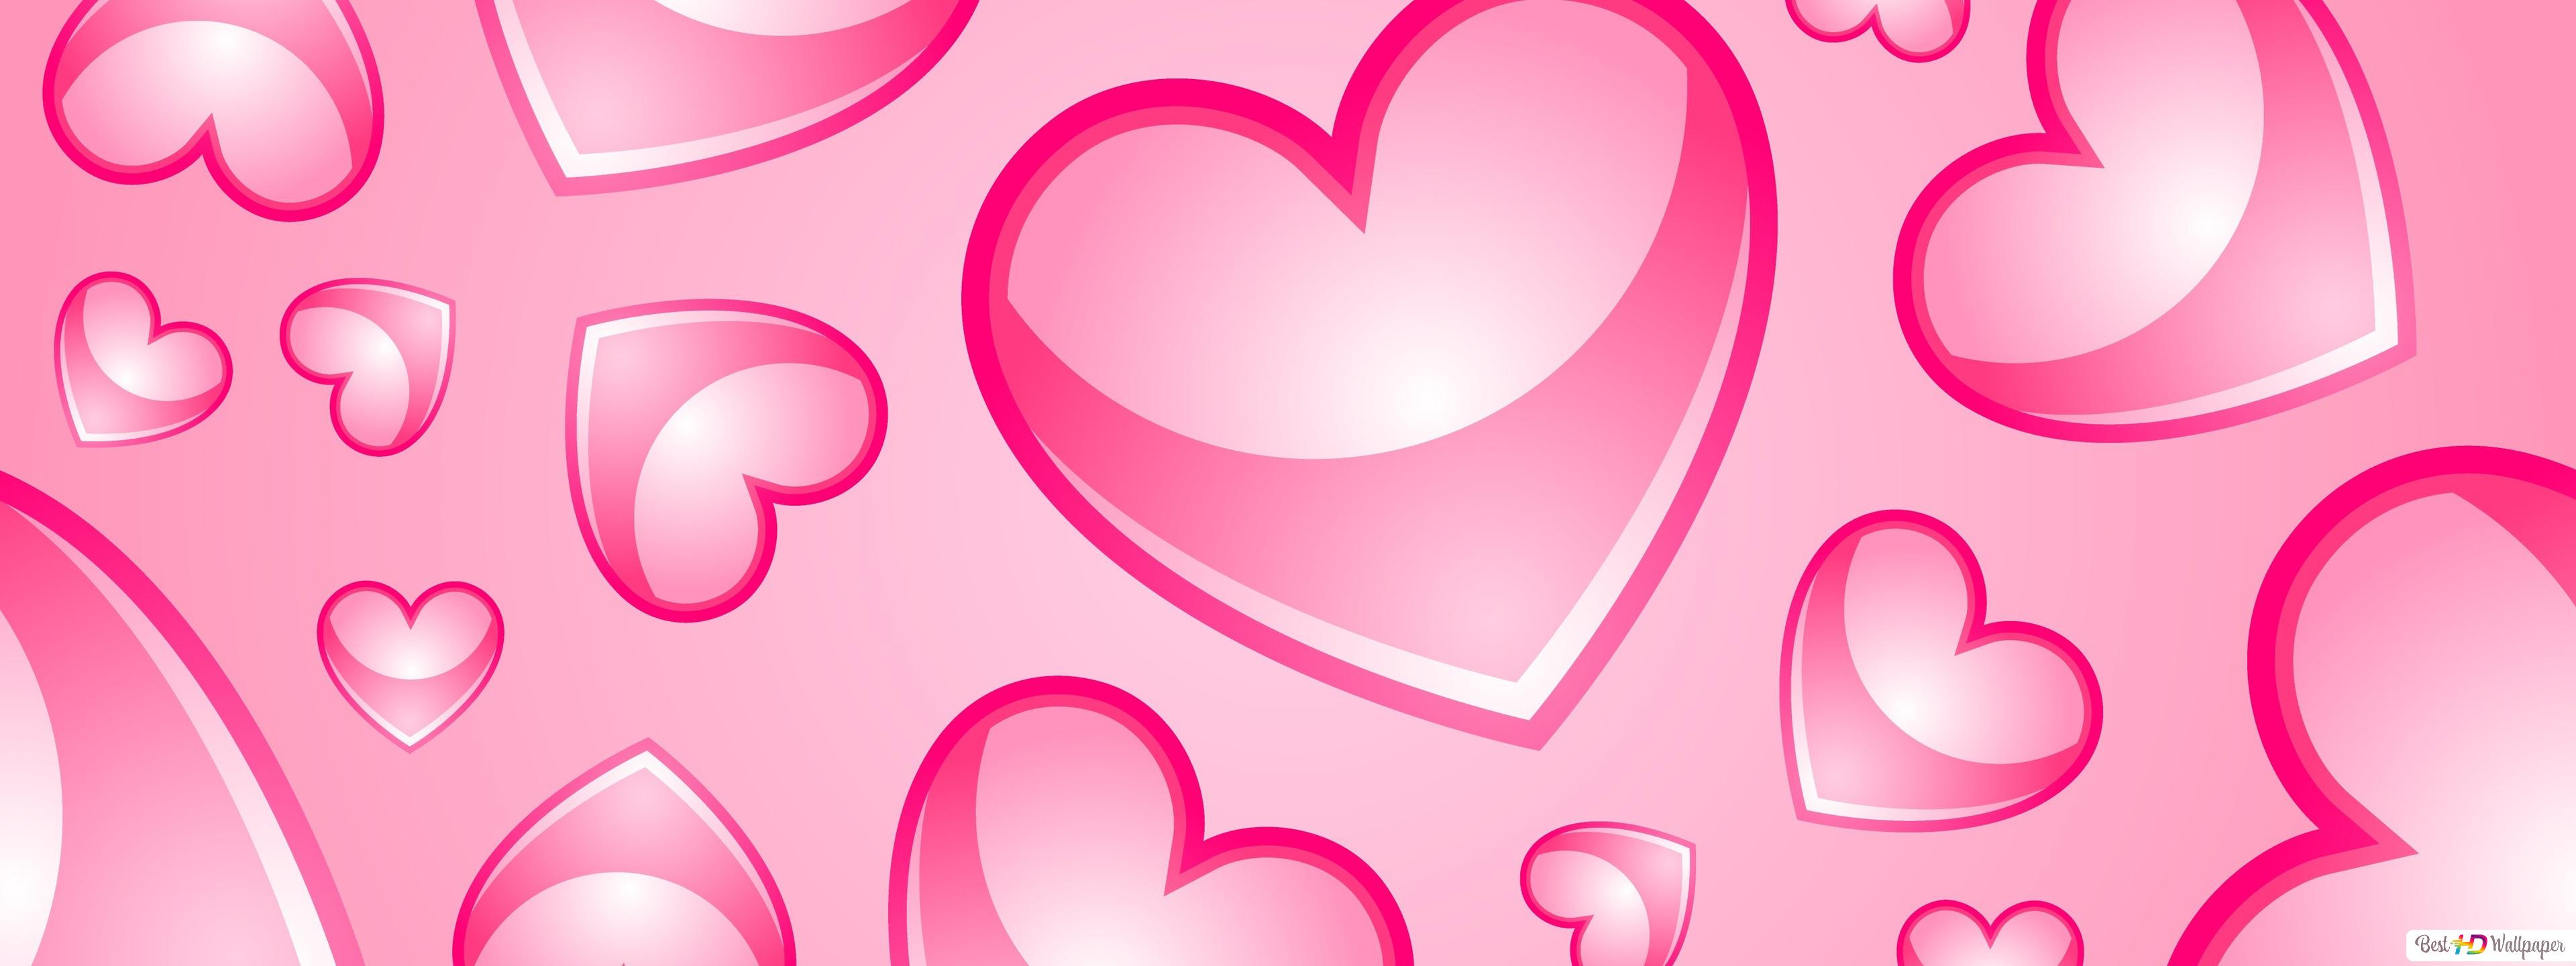 Valentine's day pink artistic hearts HD wallpaper download's Day wallpaper